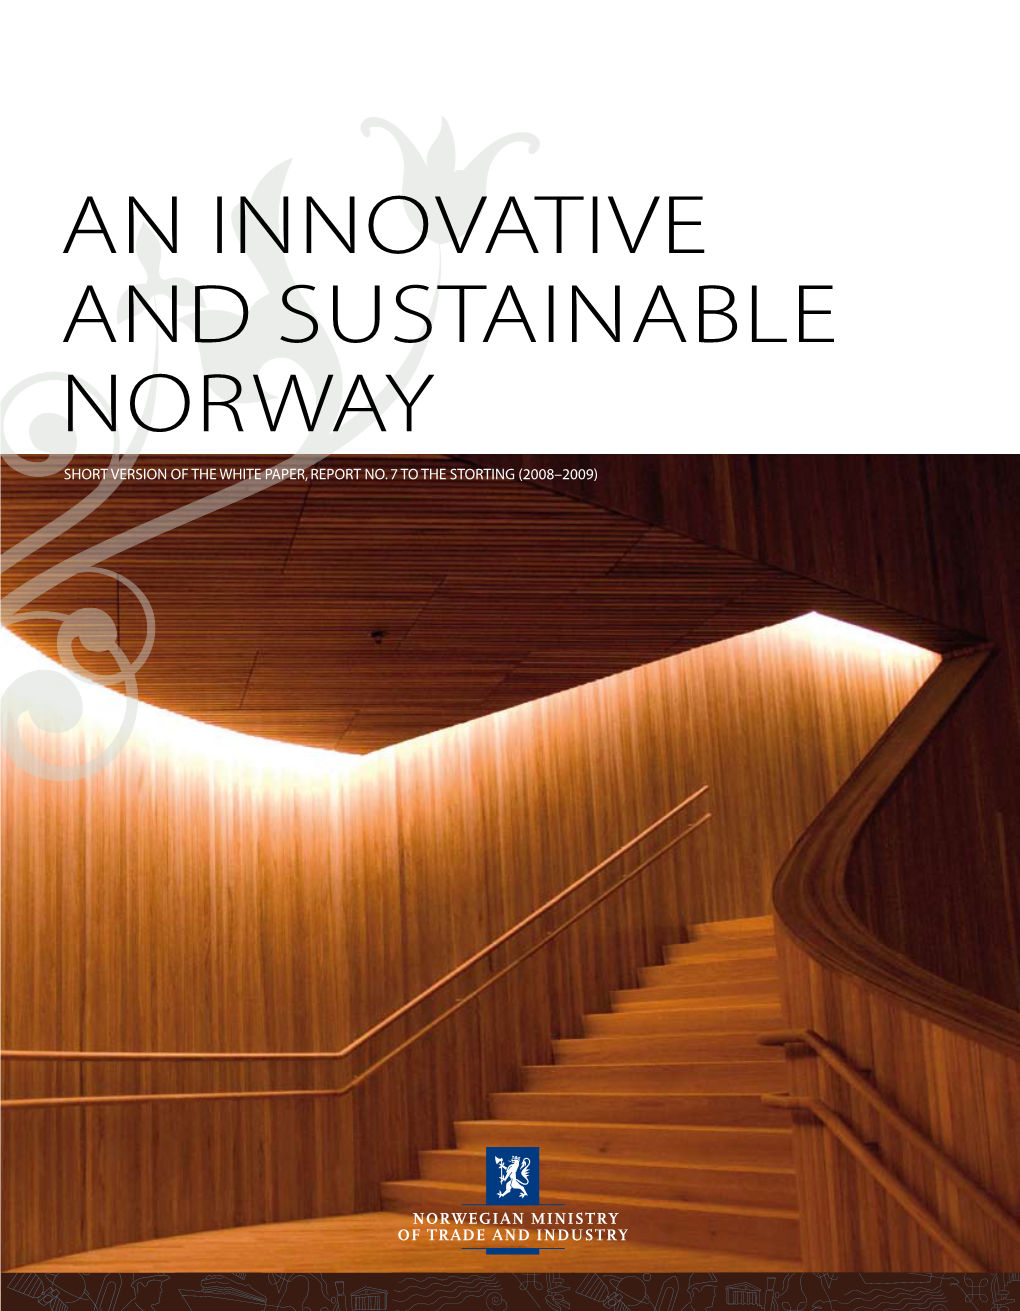 An Innovative and Sustainable Norway